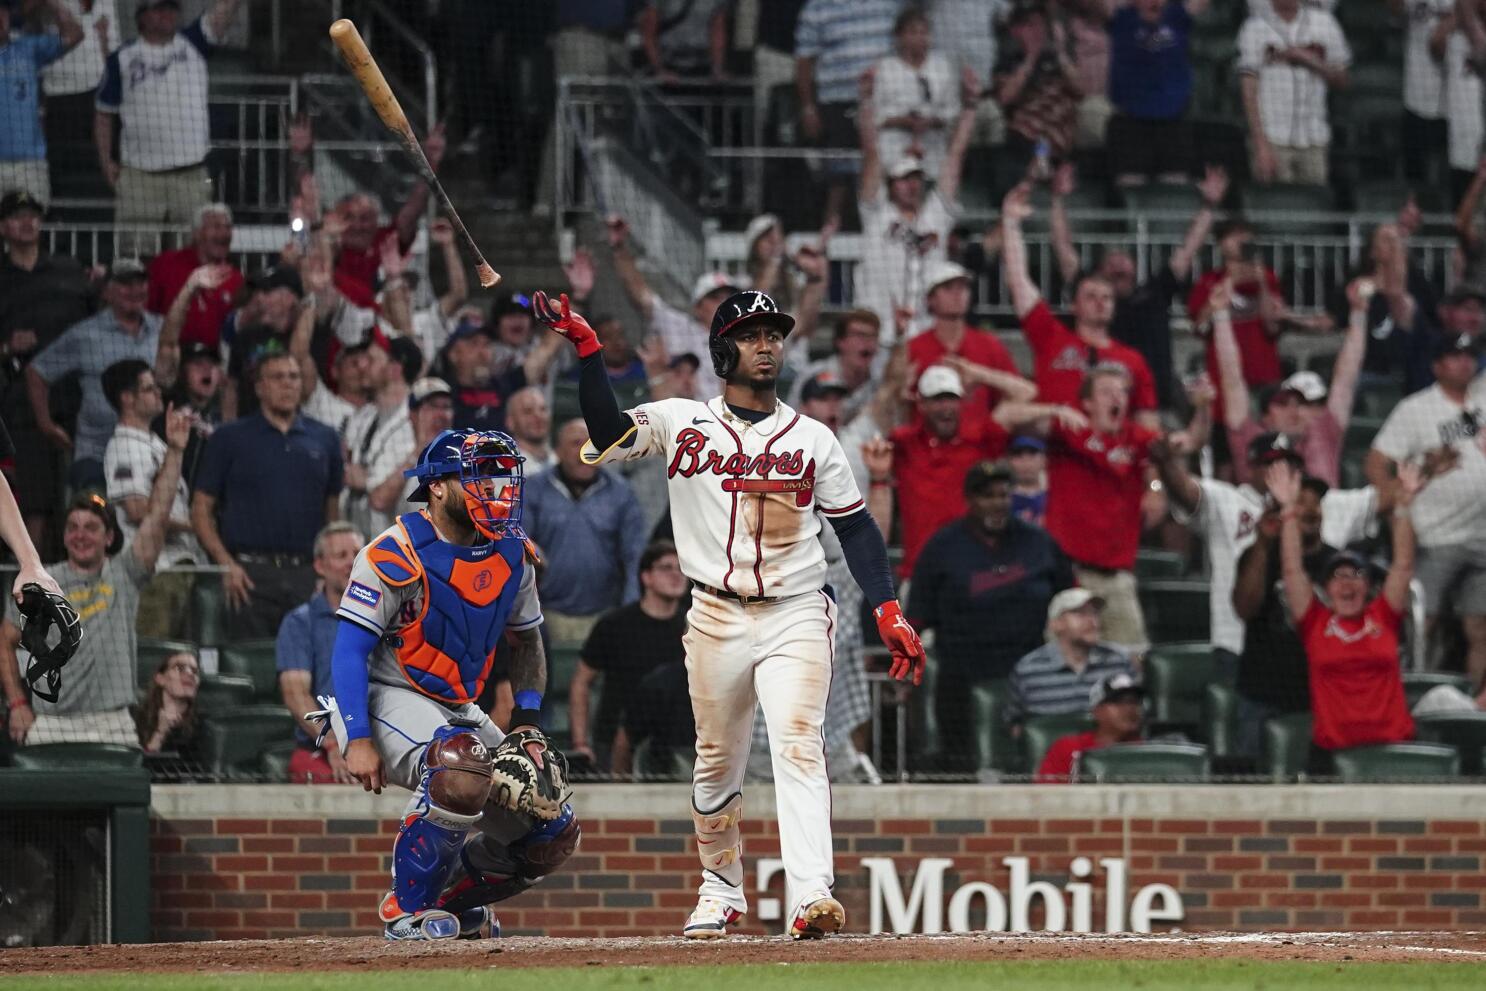 Riley homer lifts Braves over Dodgers - Taipei Times